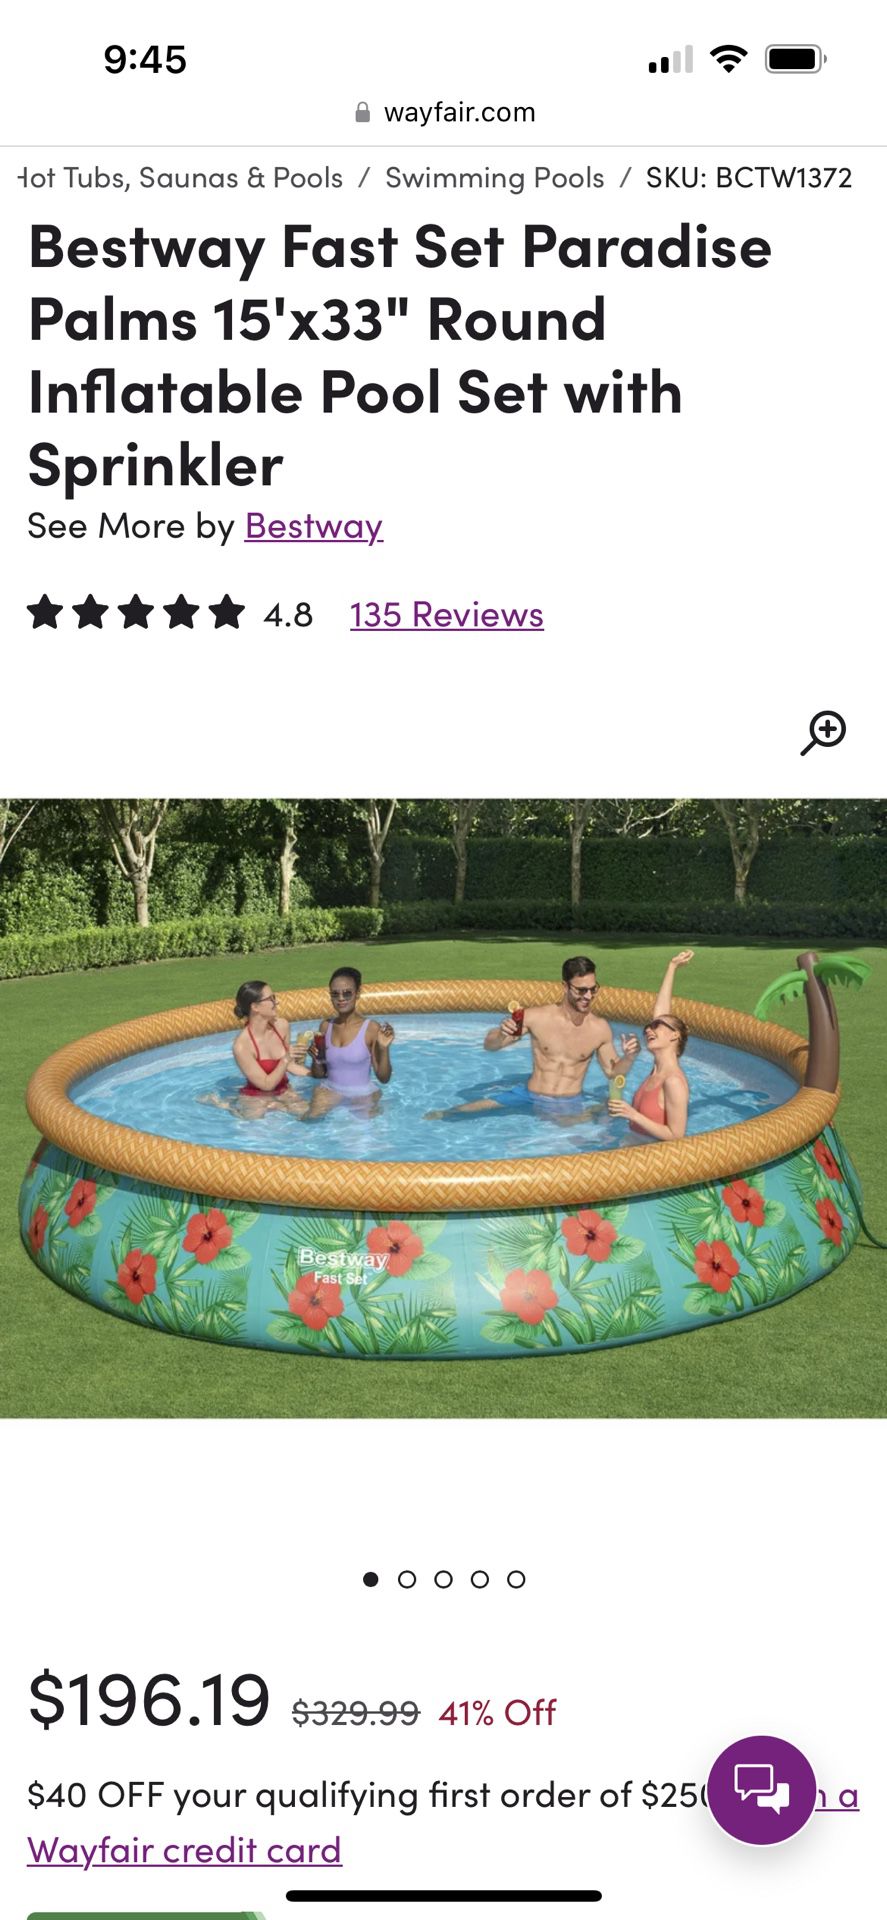 Menifee, Palms CA Accessories - OfferUp Paradise Best Sale for With Inflatable way Pool Set in Fast